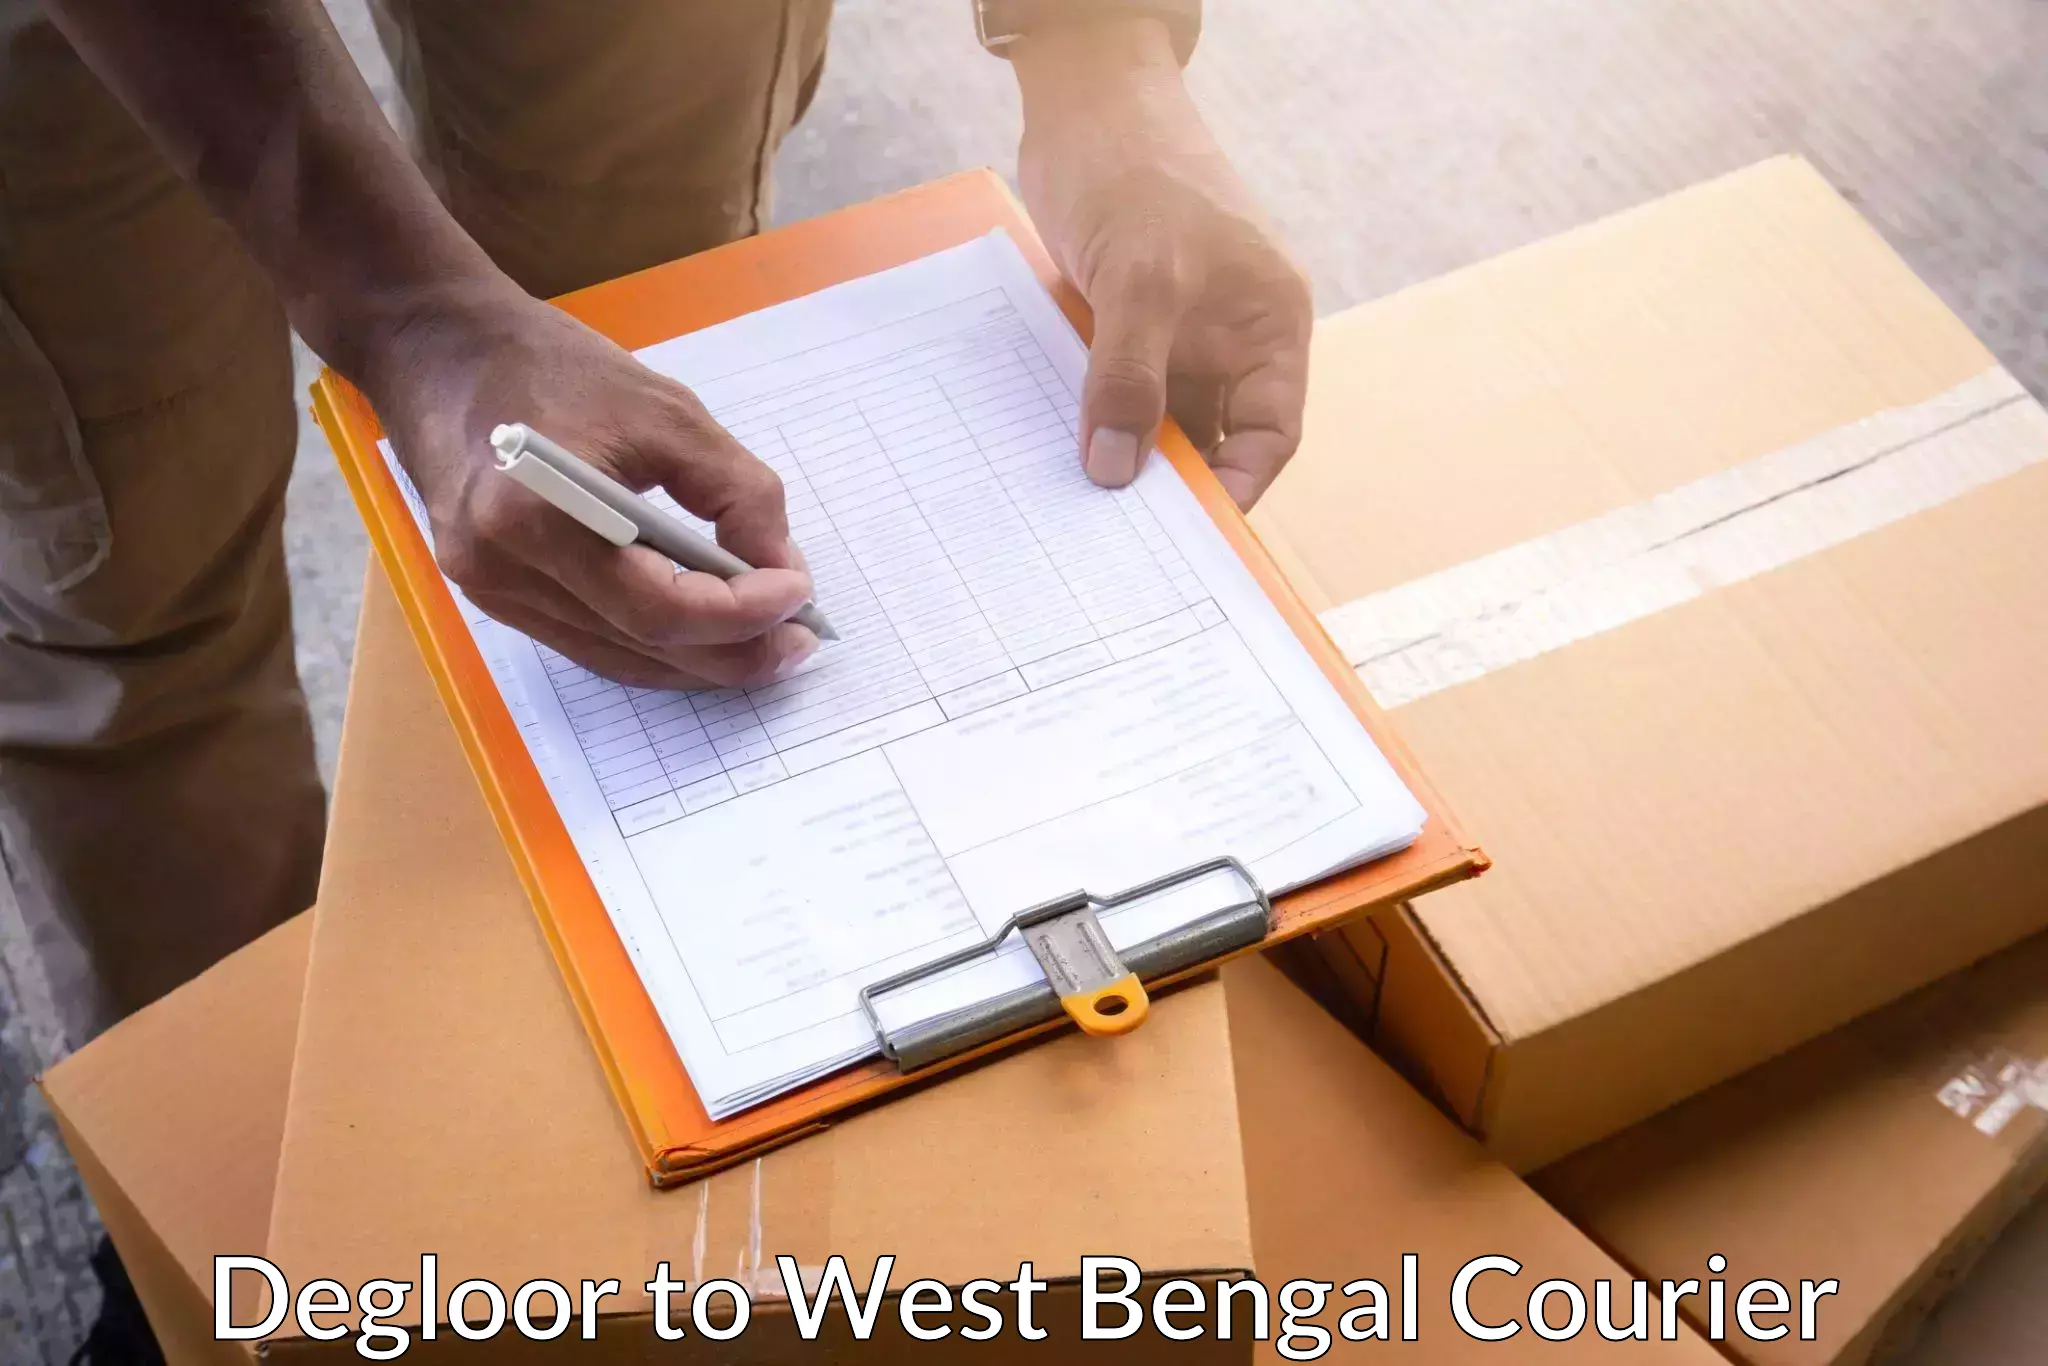 Express delivery solutions Degloor to West Bengal